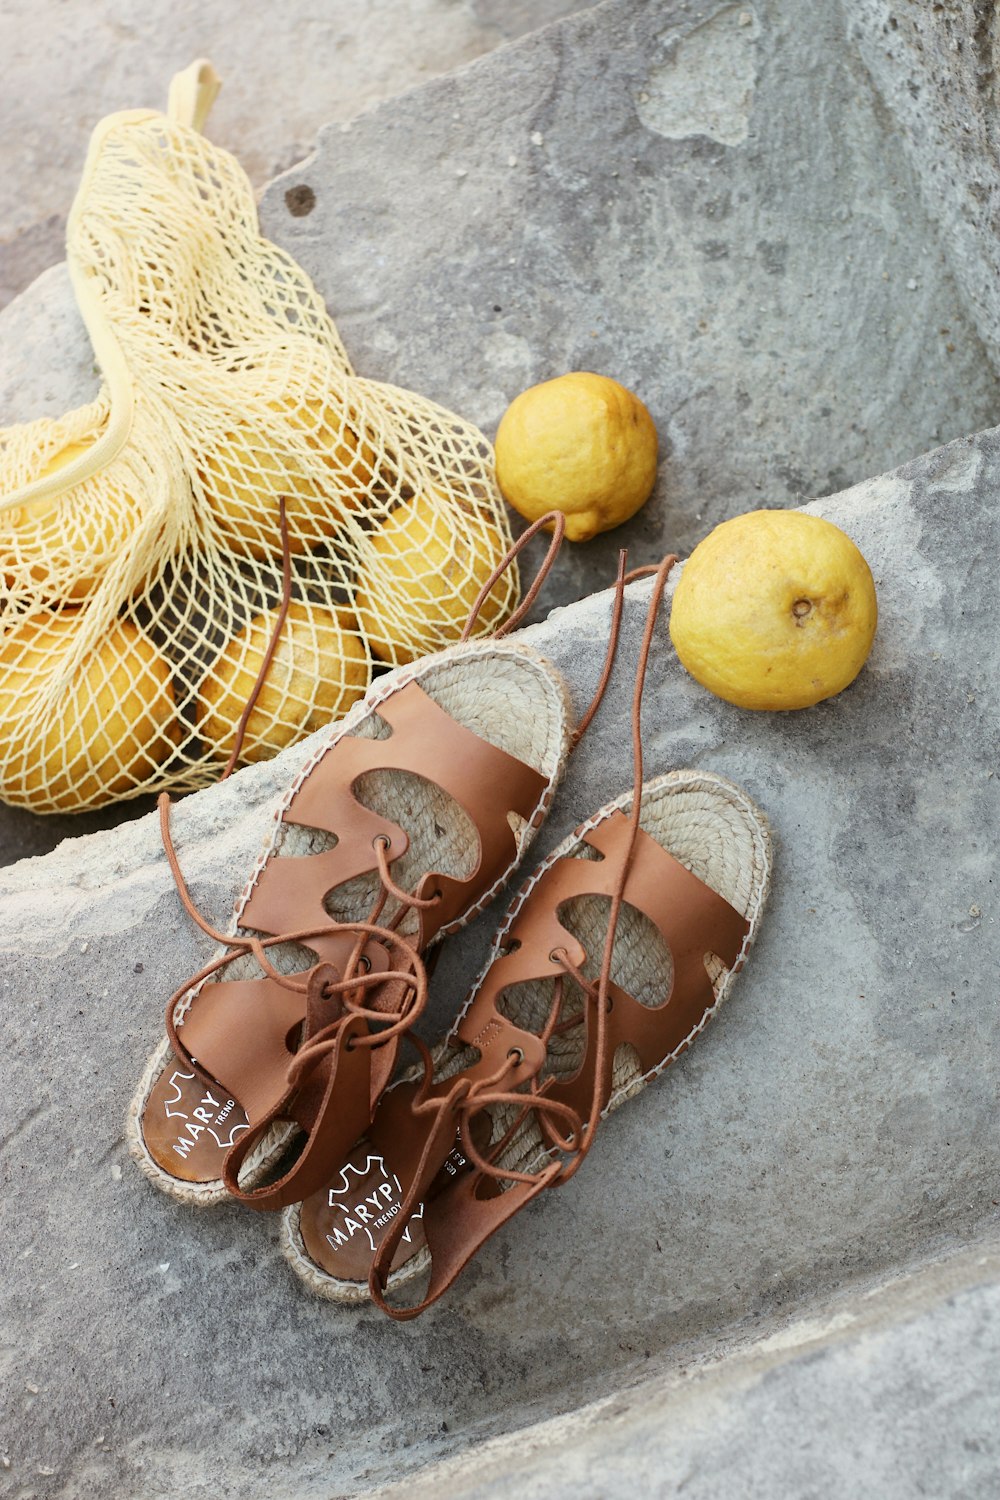 brown leather sandals beside yellow fruit